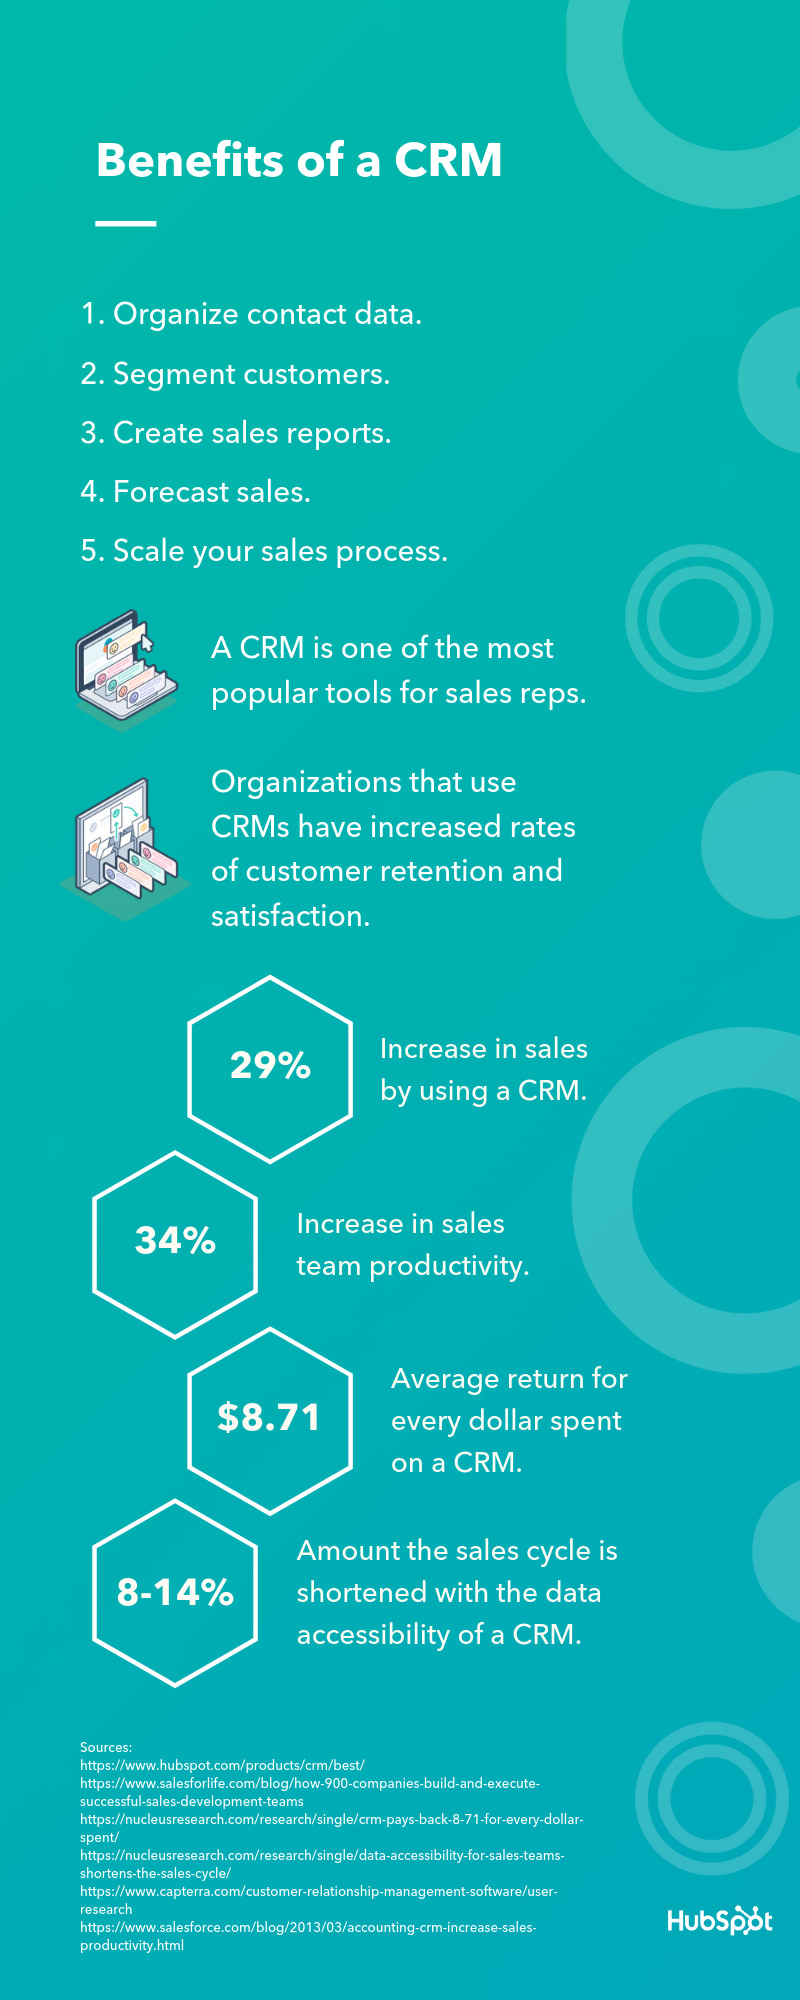 Benefits of CRM for small businesses